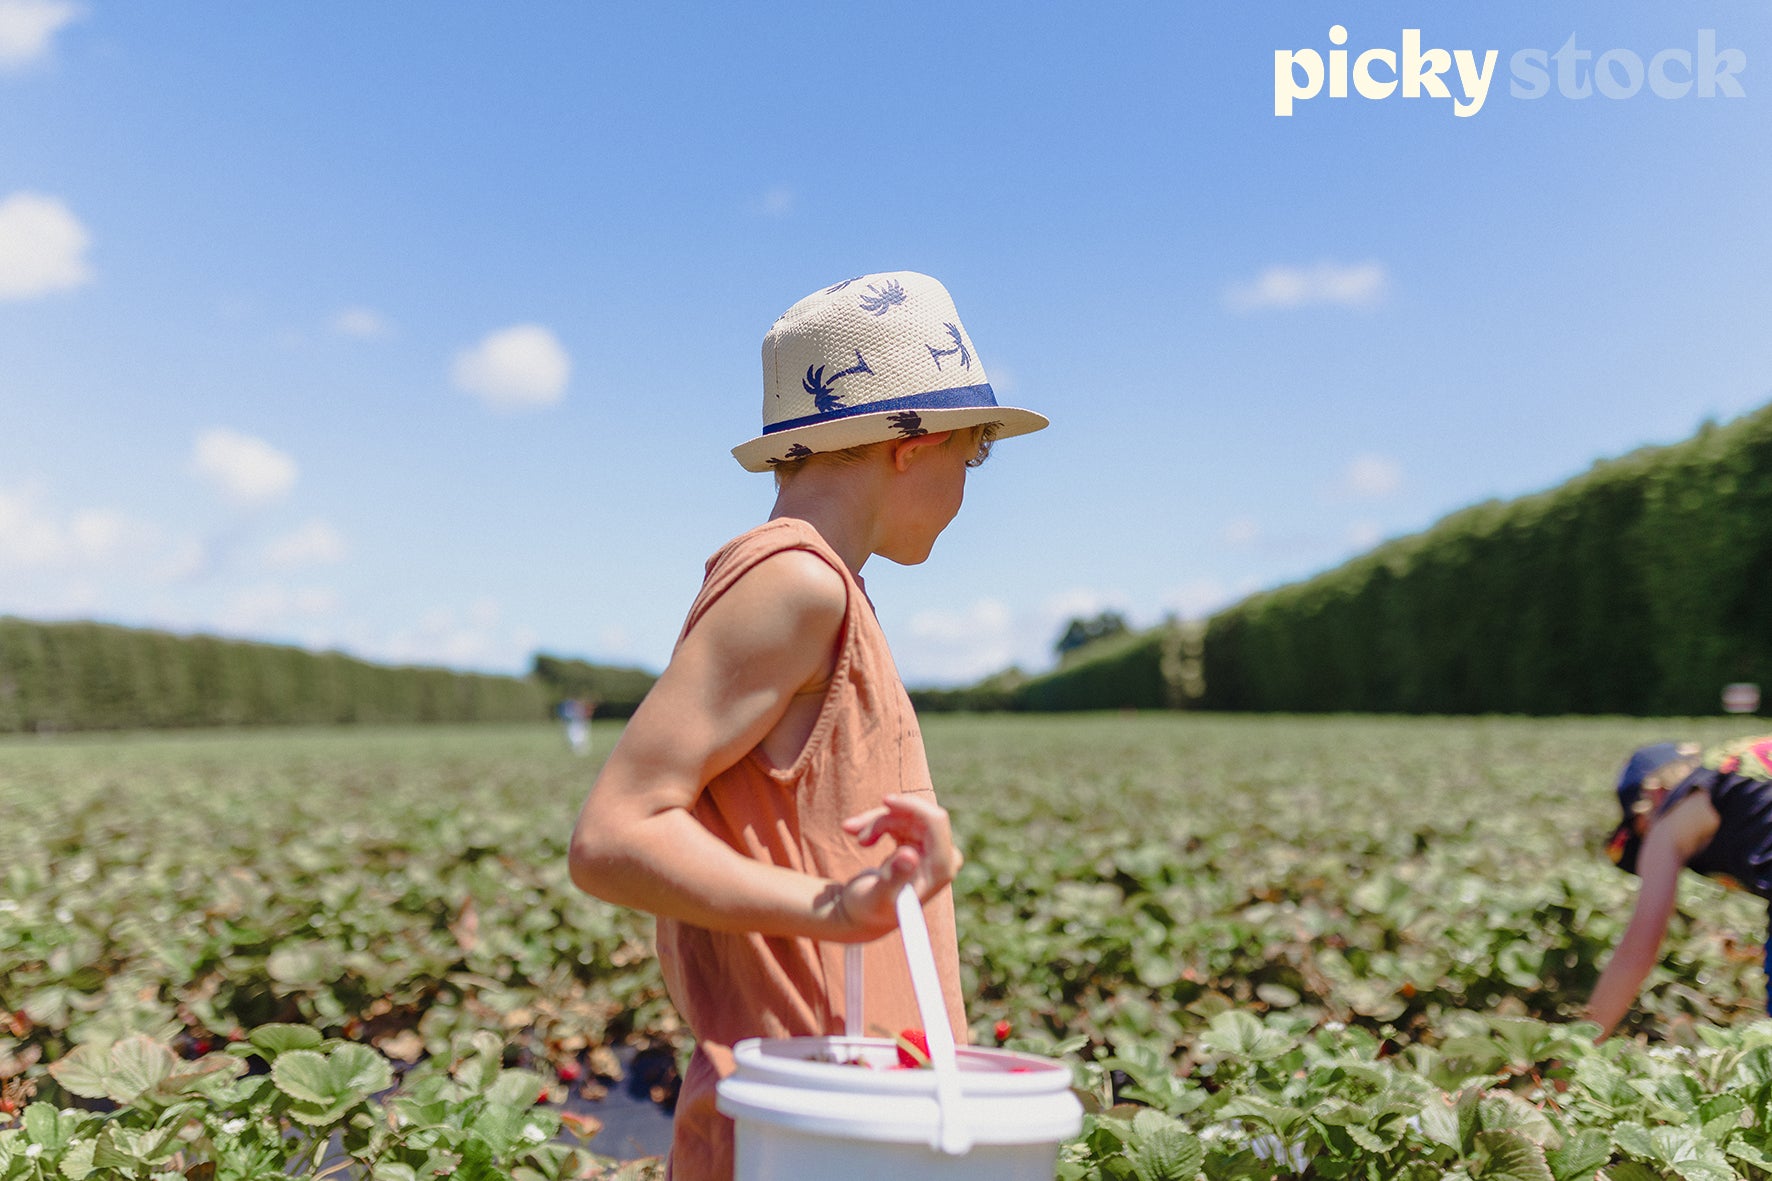 Young boy holding a white bucket full of freshly picked strawberries. Wearing a hat with palm trees, and an orange singlet. Behind him are rows and rows of green strawberry plants, with a big green hedge to the right. Lady right of frame out of focus also picking strawberries